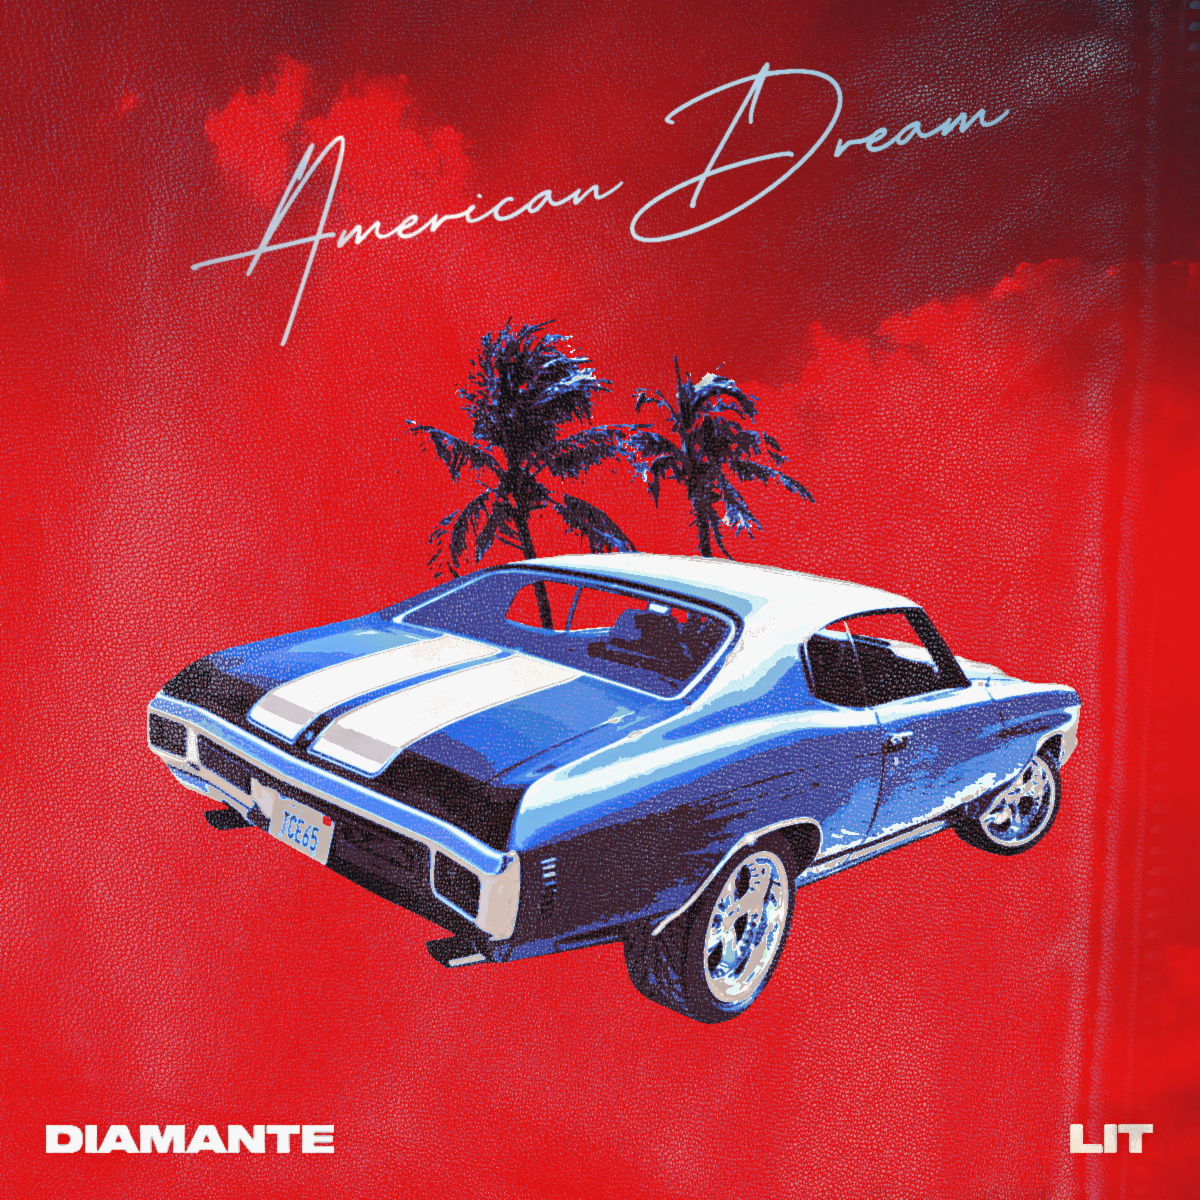 DIAMANTE Releases New Music Video For Reinvigoration of "American Dream" featuring Lit